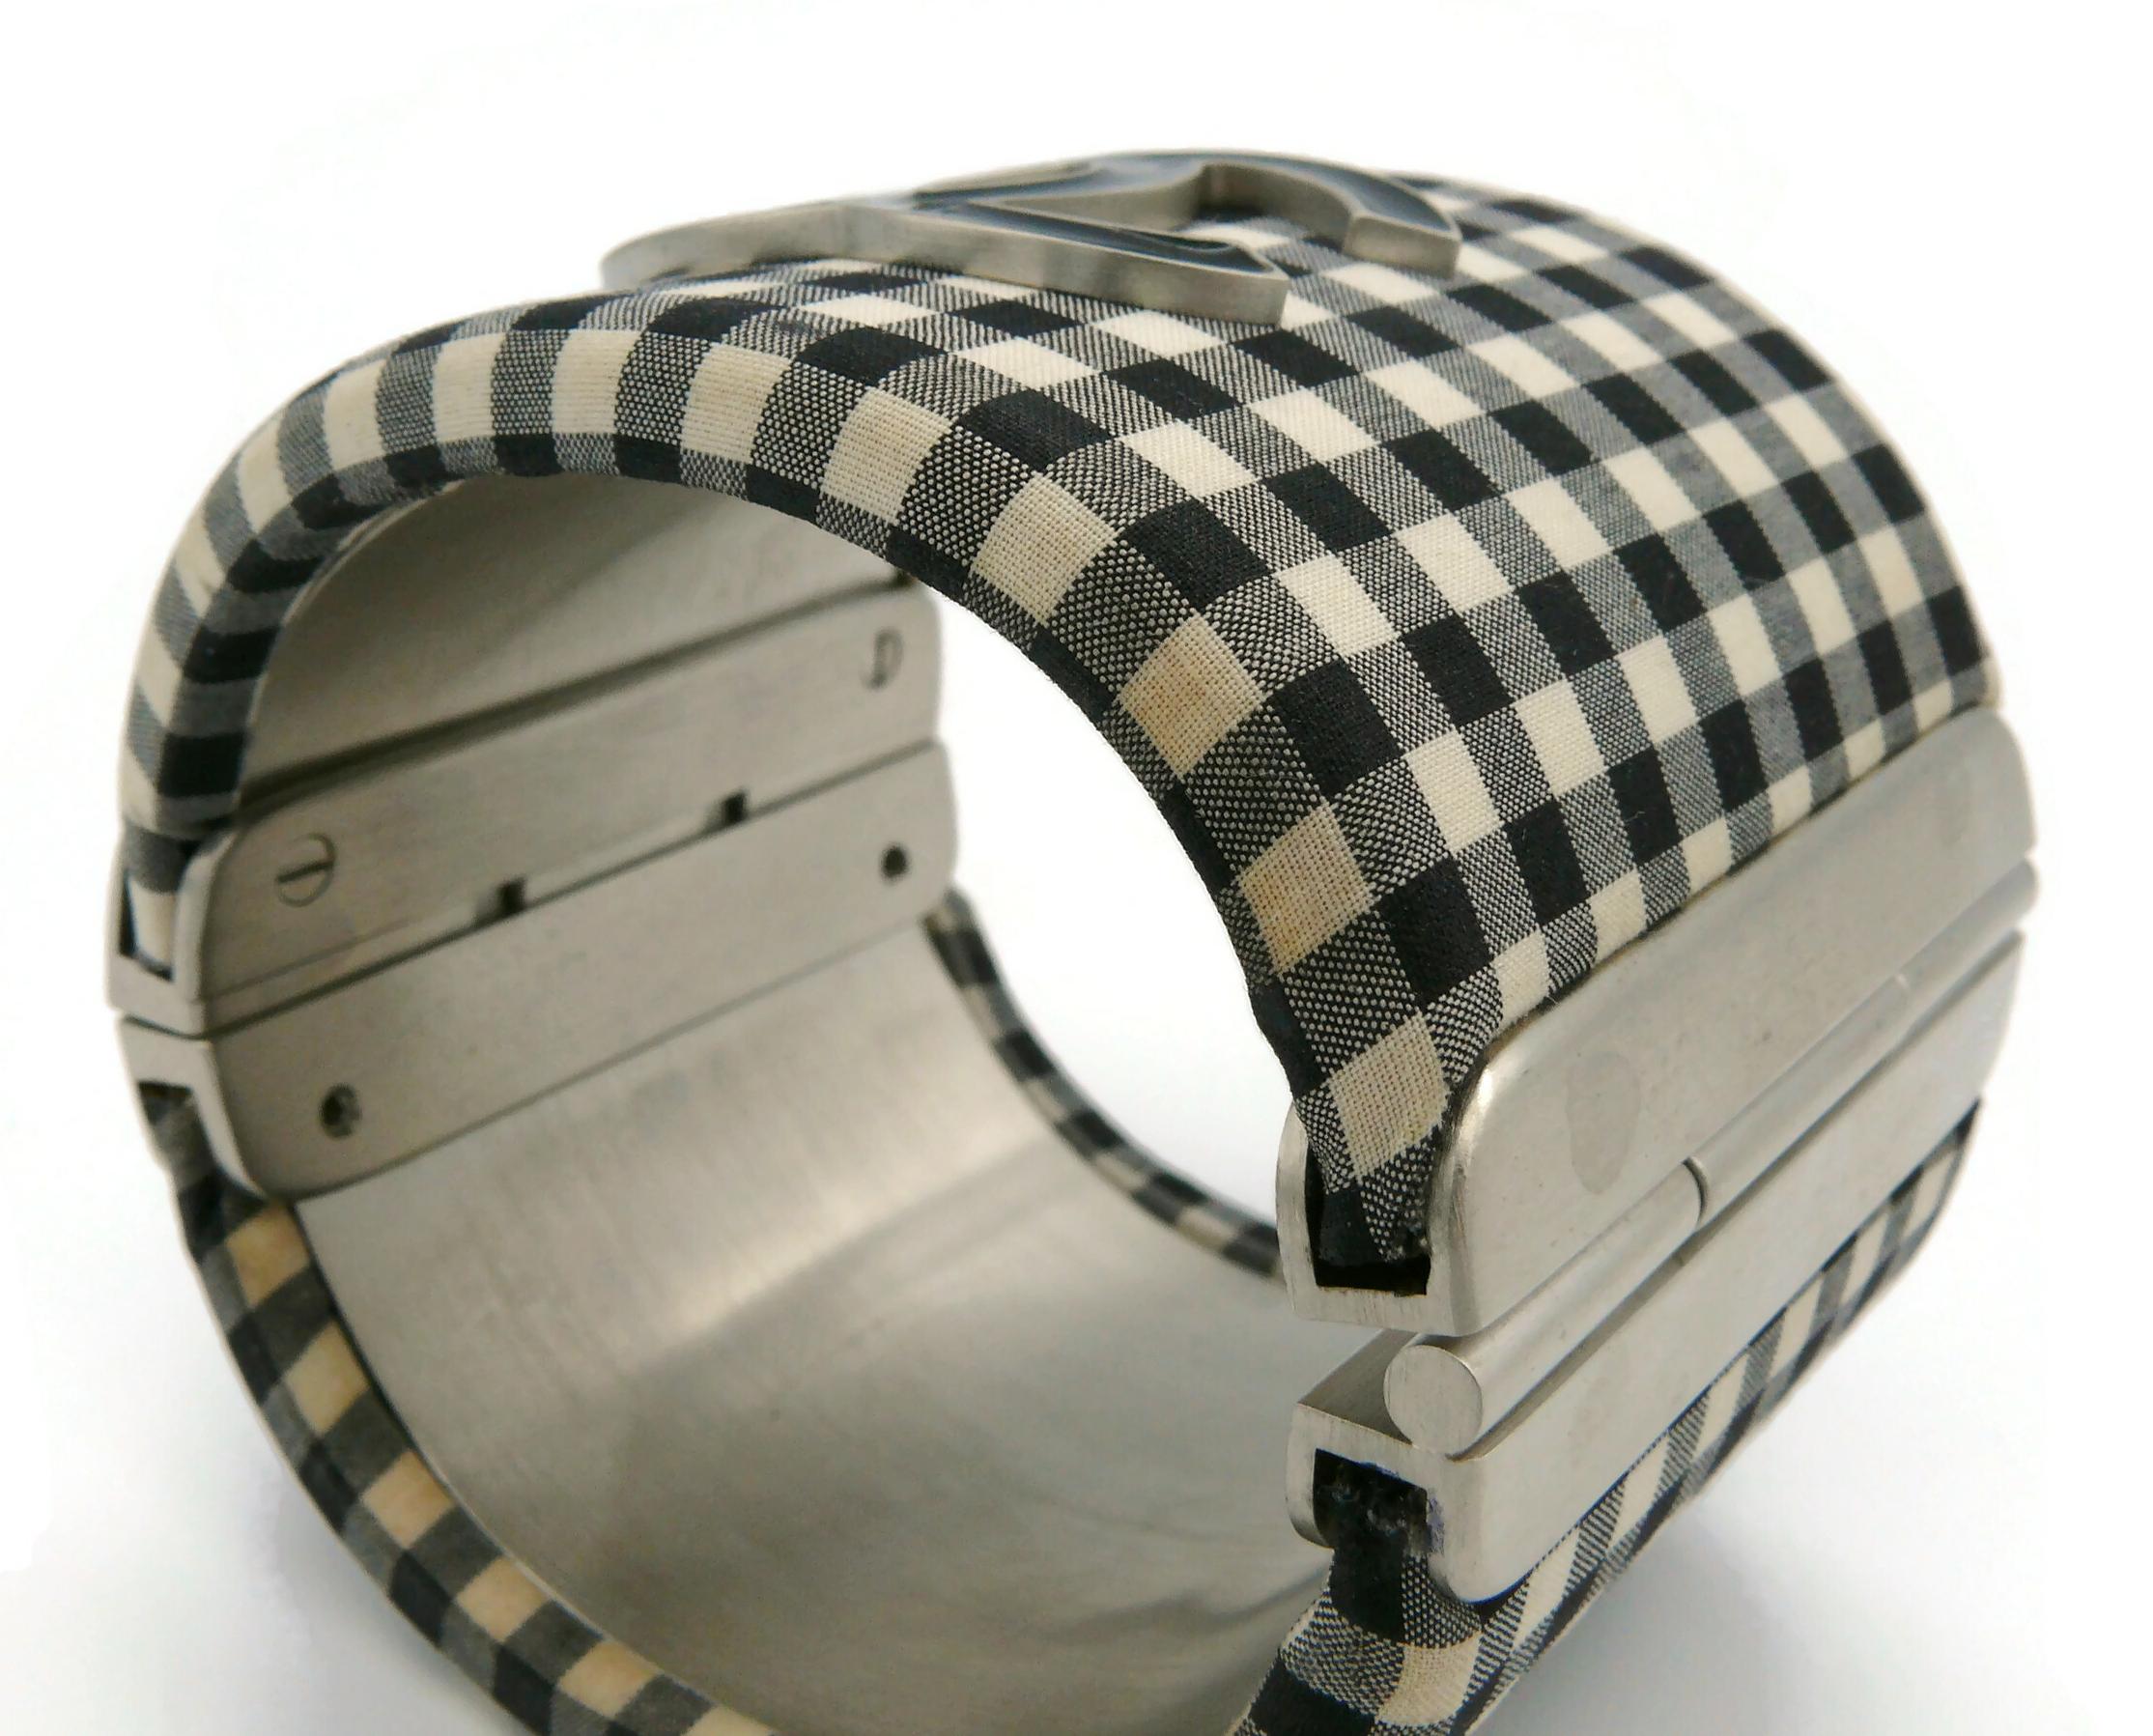 CHANEL Black and White Gingham Vichy Print Cuff Bracelet, Resort Collection 2011 For Sale 9